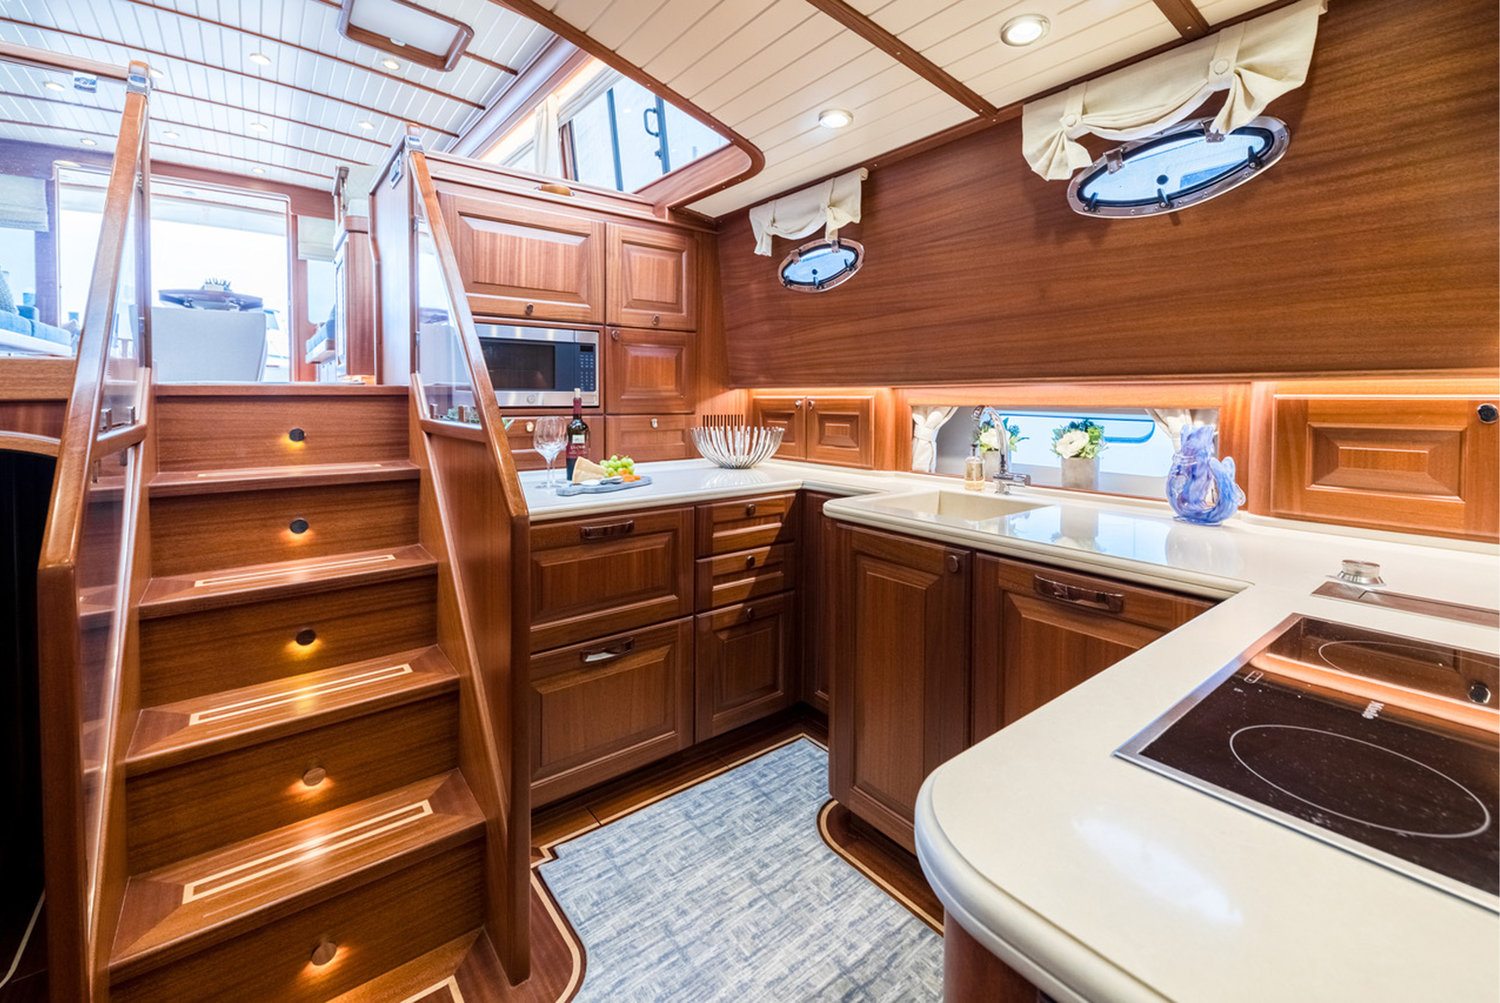 The galley and accommodations live on the lower deck